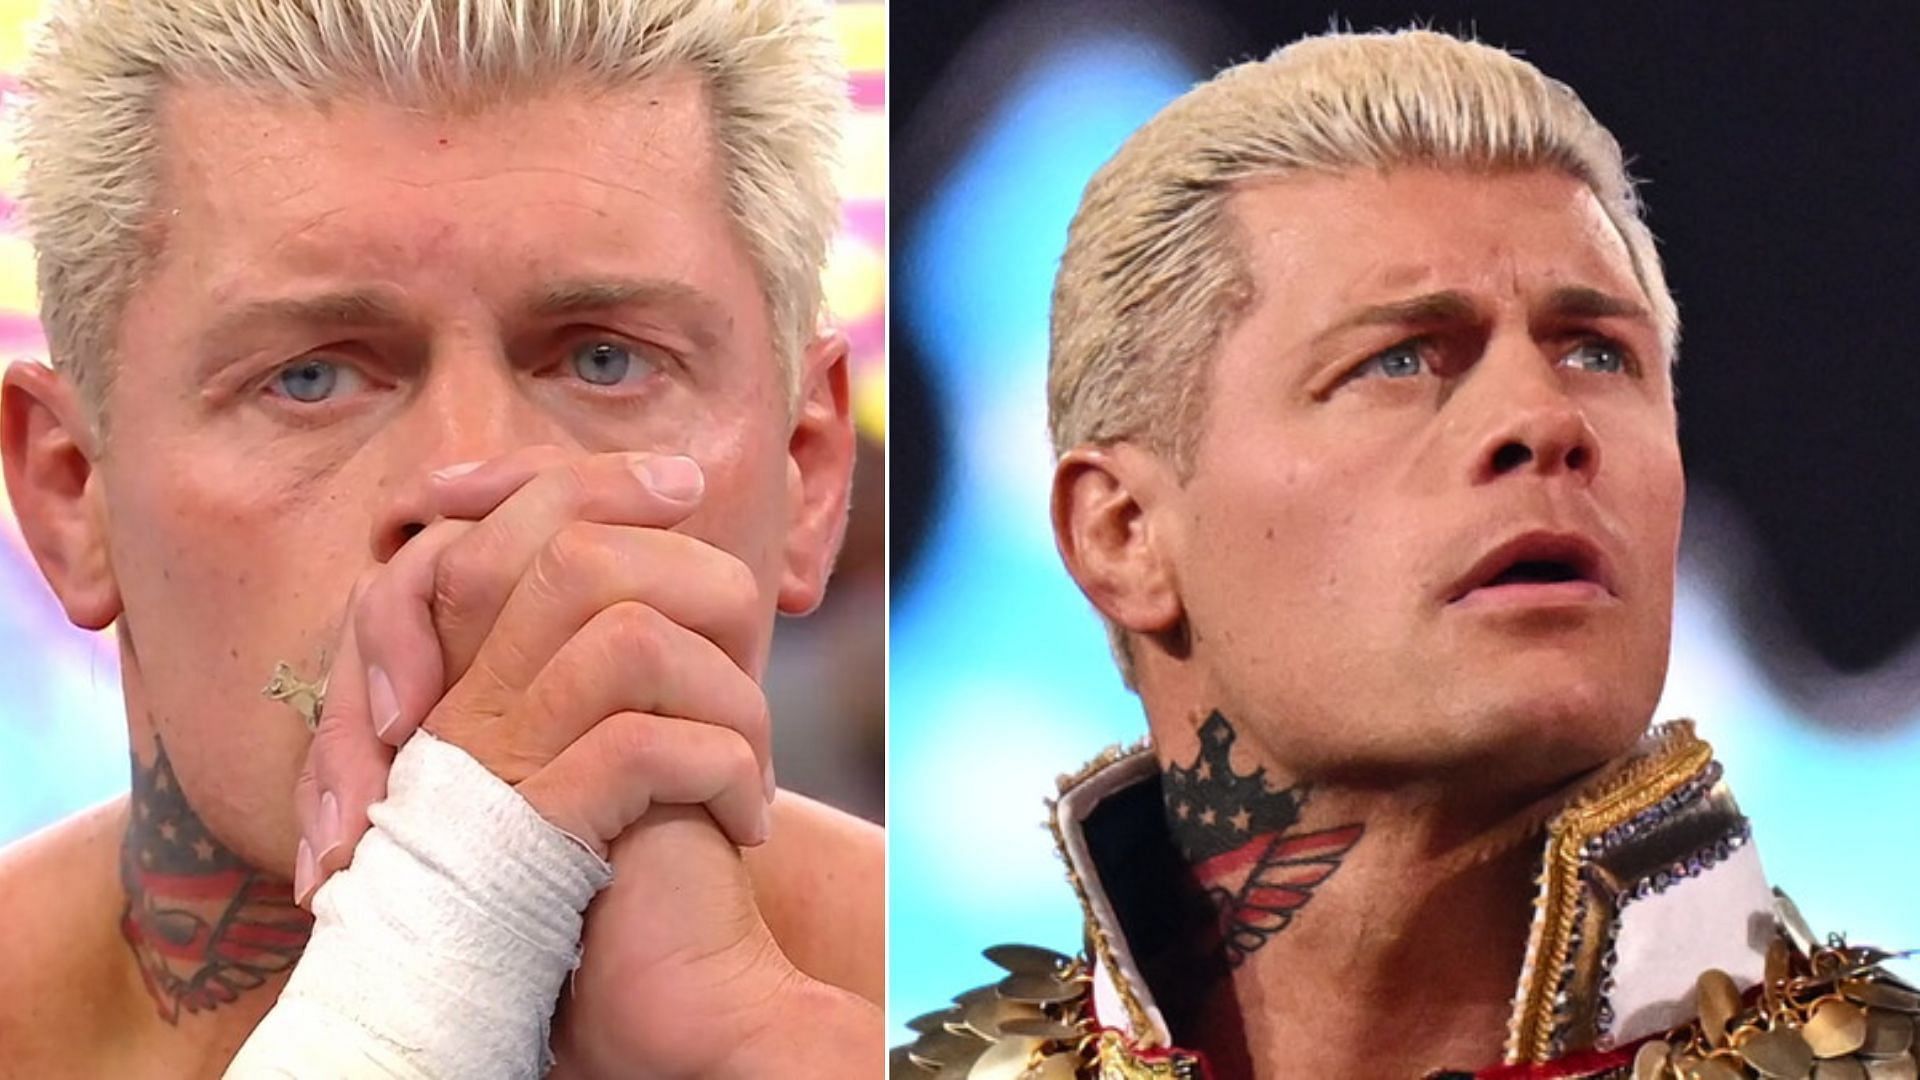 Cody Rhodes lost to Roman Reigns in the heart-stopping main event of WrestleMania 39.